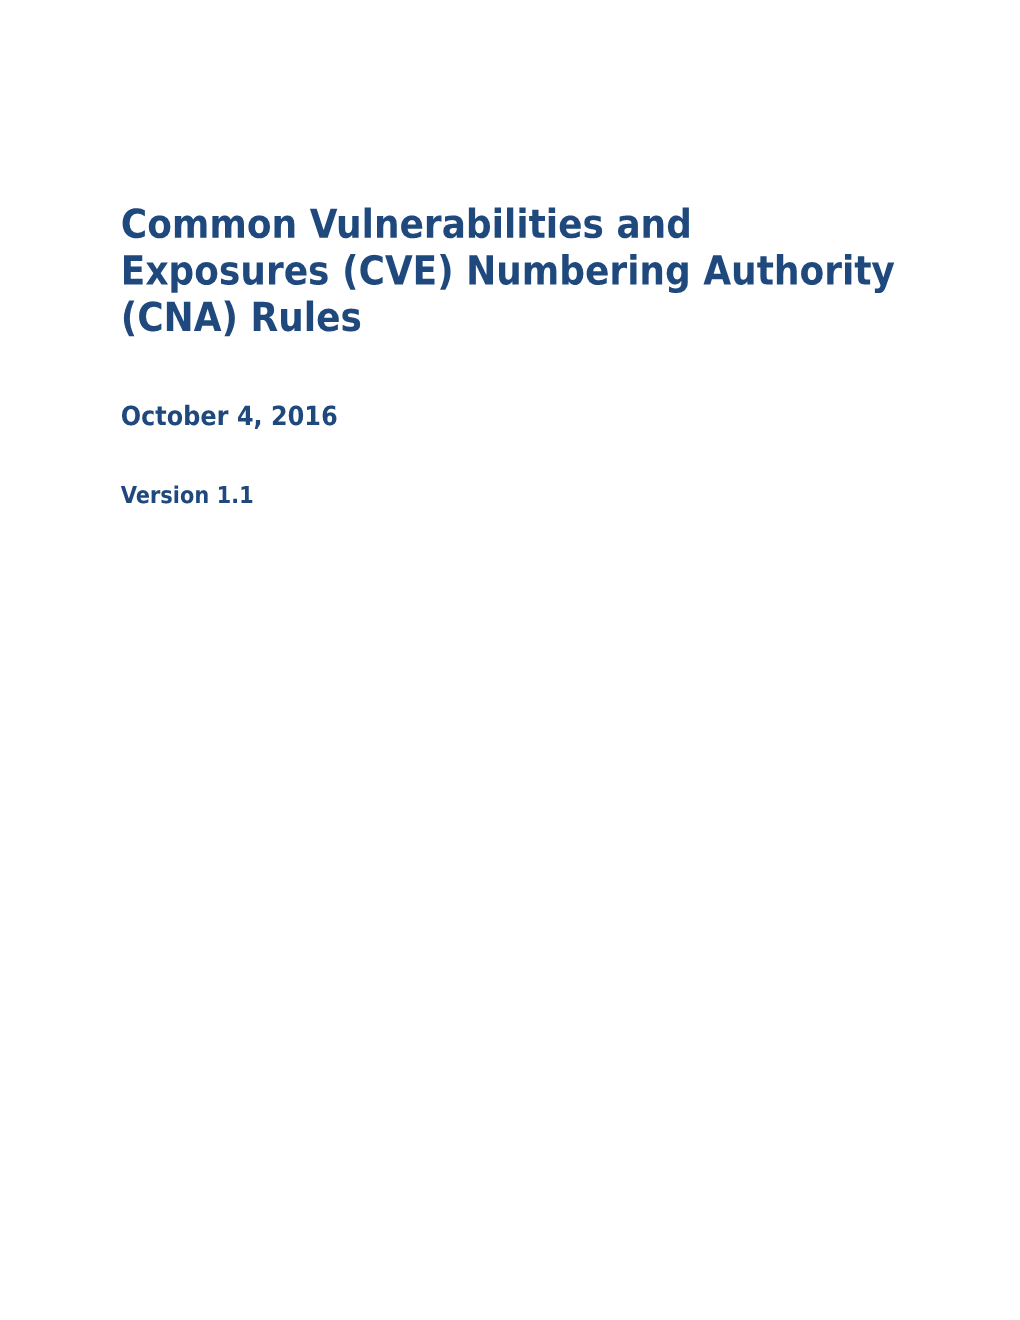 Common Vulnerabilities and Exposures (CVE) Numbering Authority (CNA) Rules